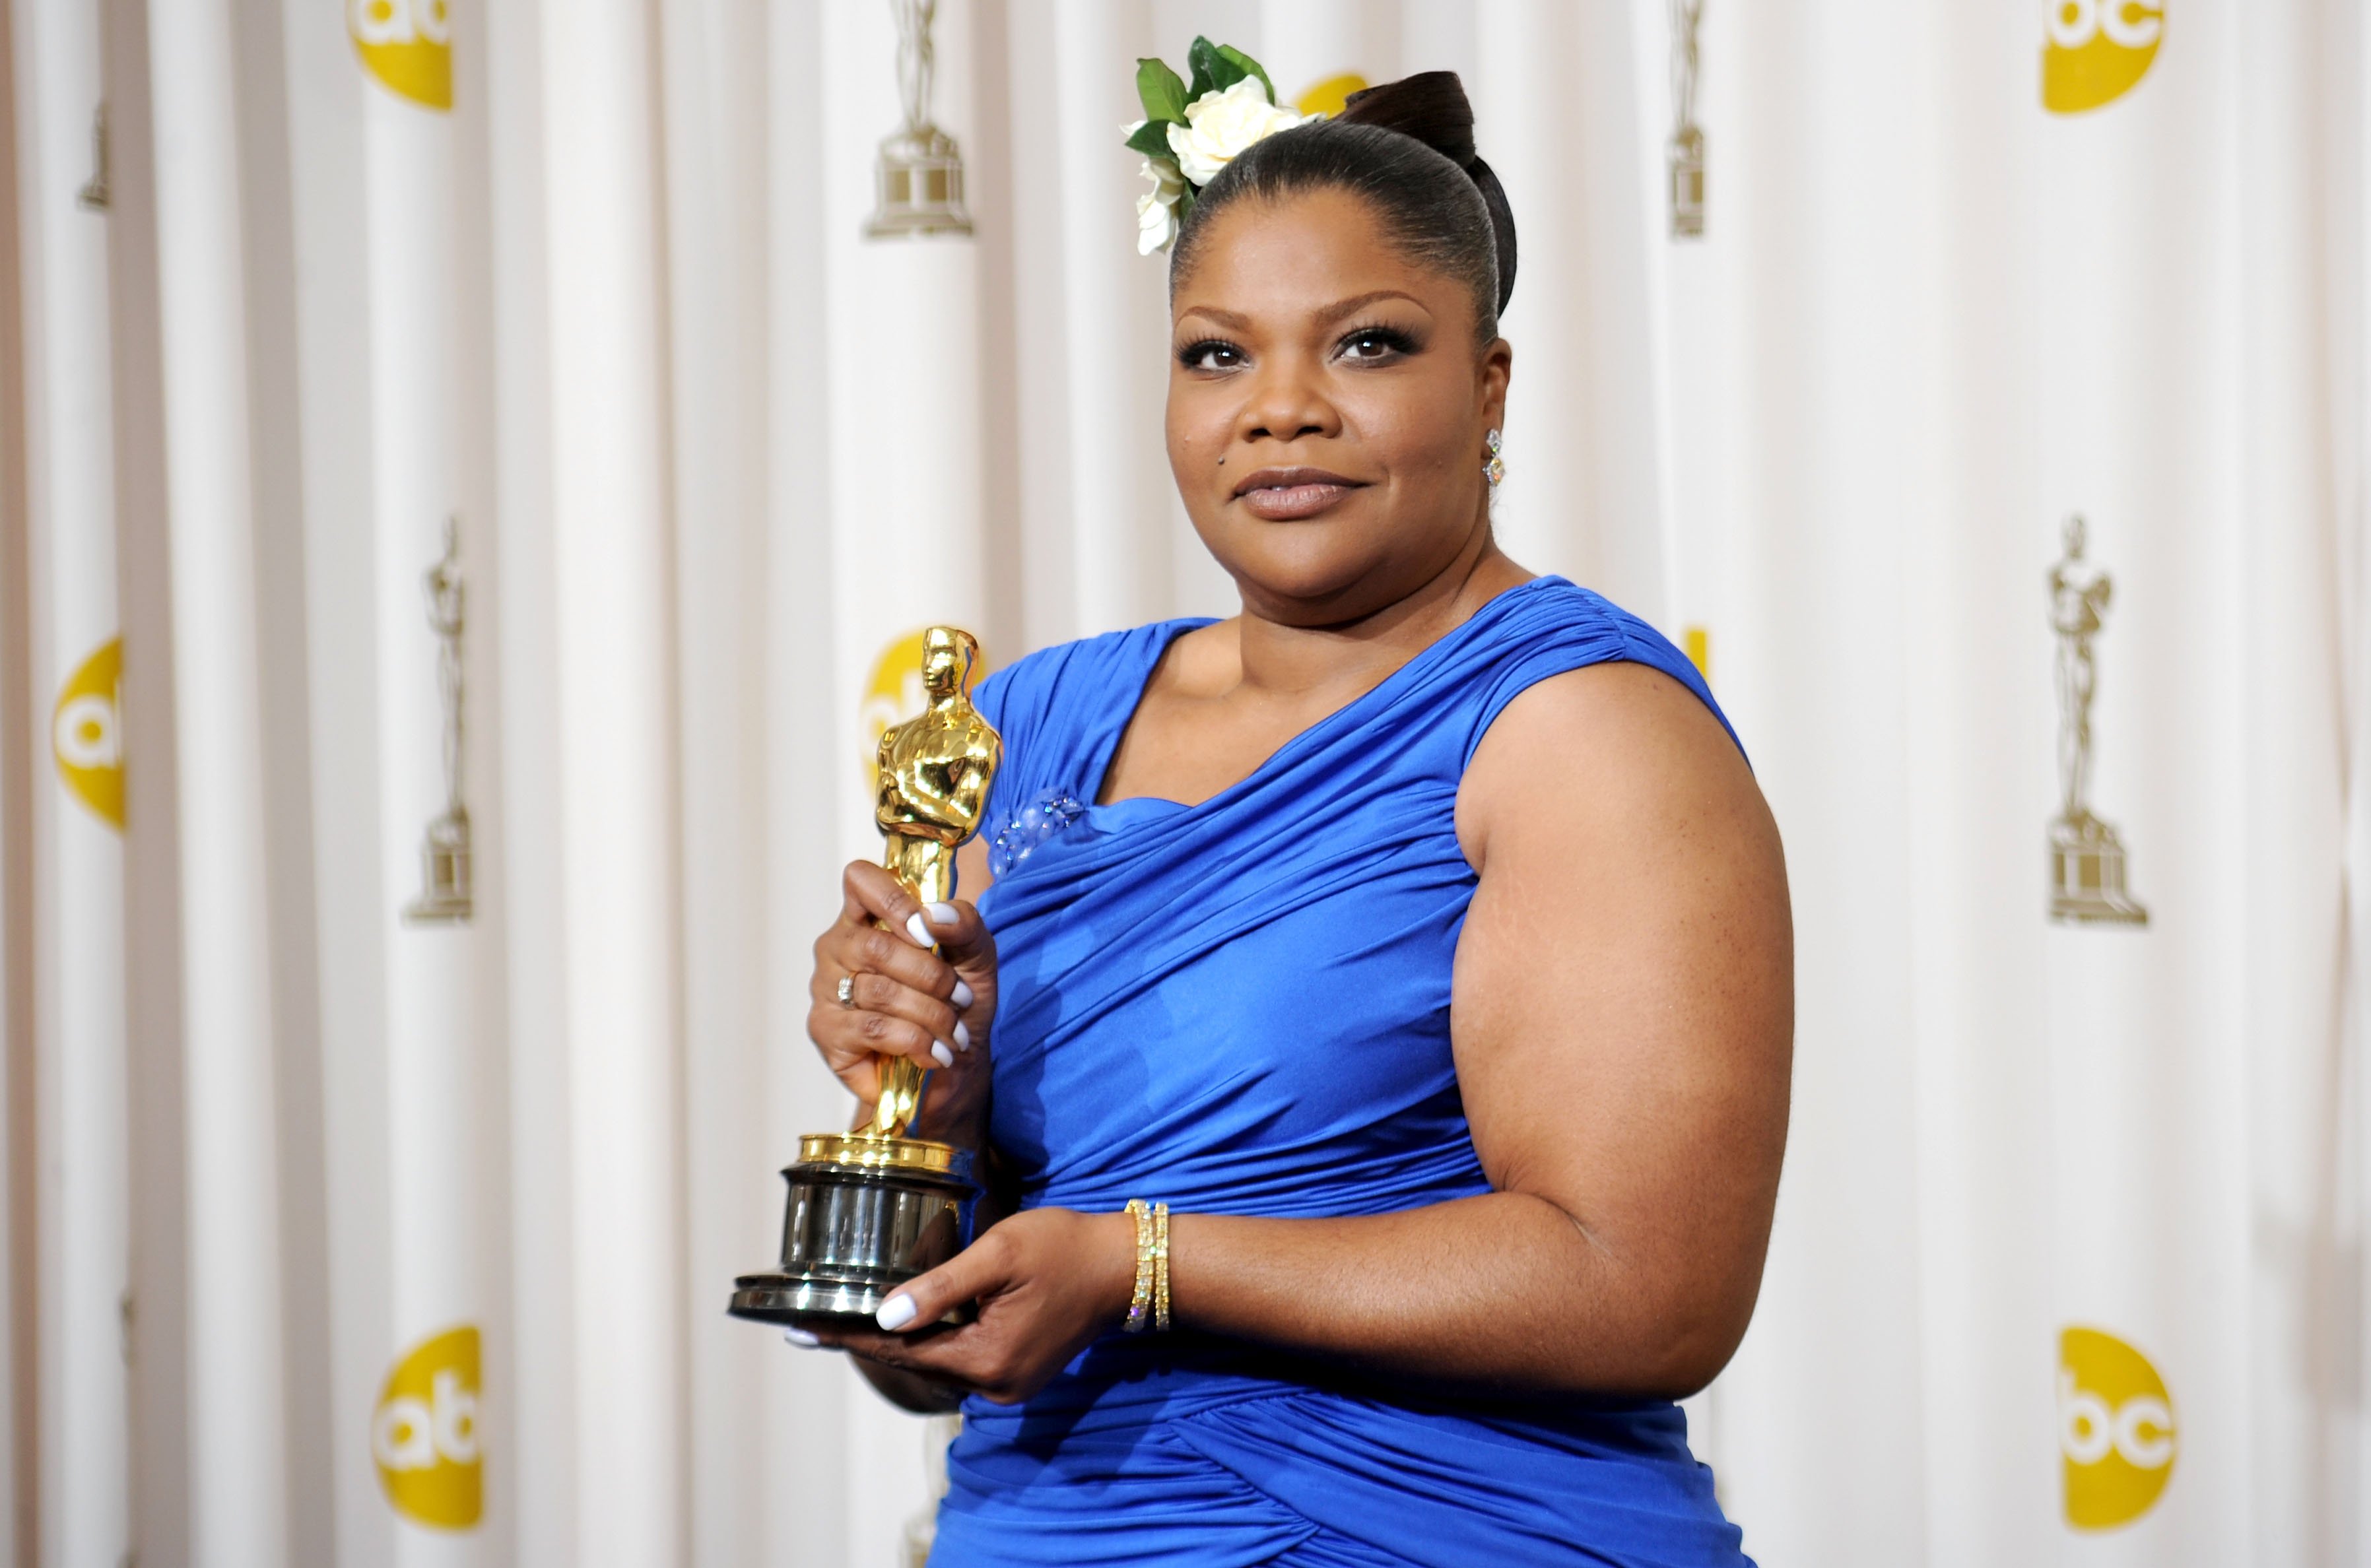 Academy Award winner Mo'Nique holding up her Oscar after her 2010 win. | Photo: Getty Images